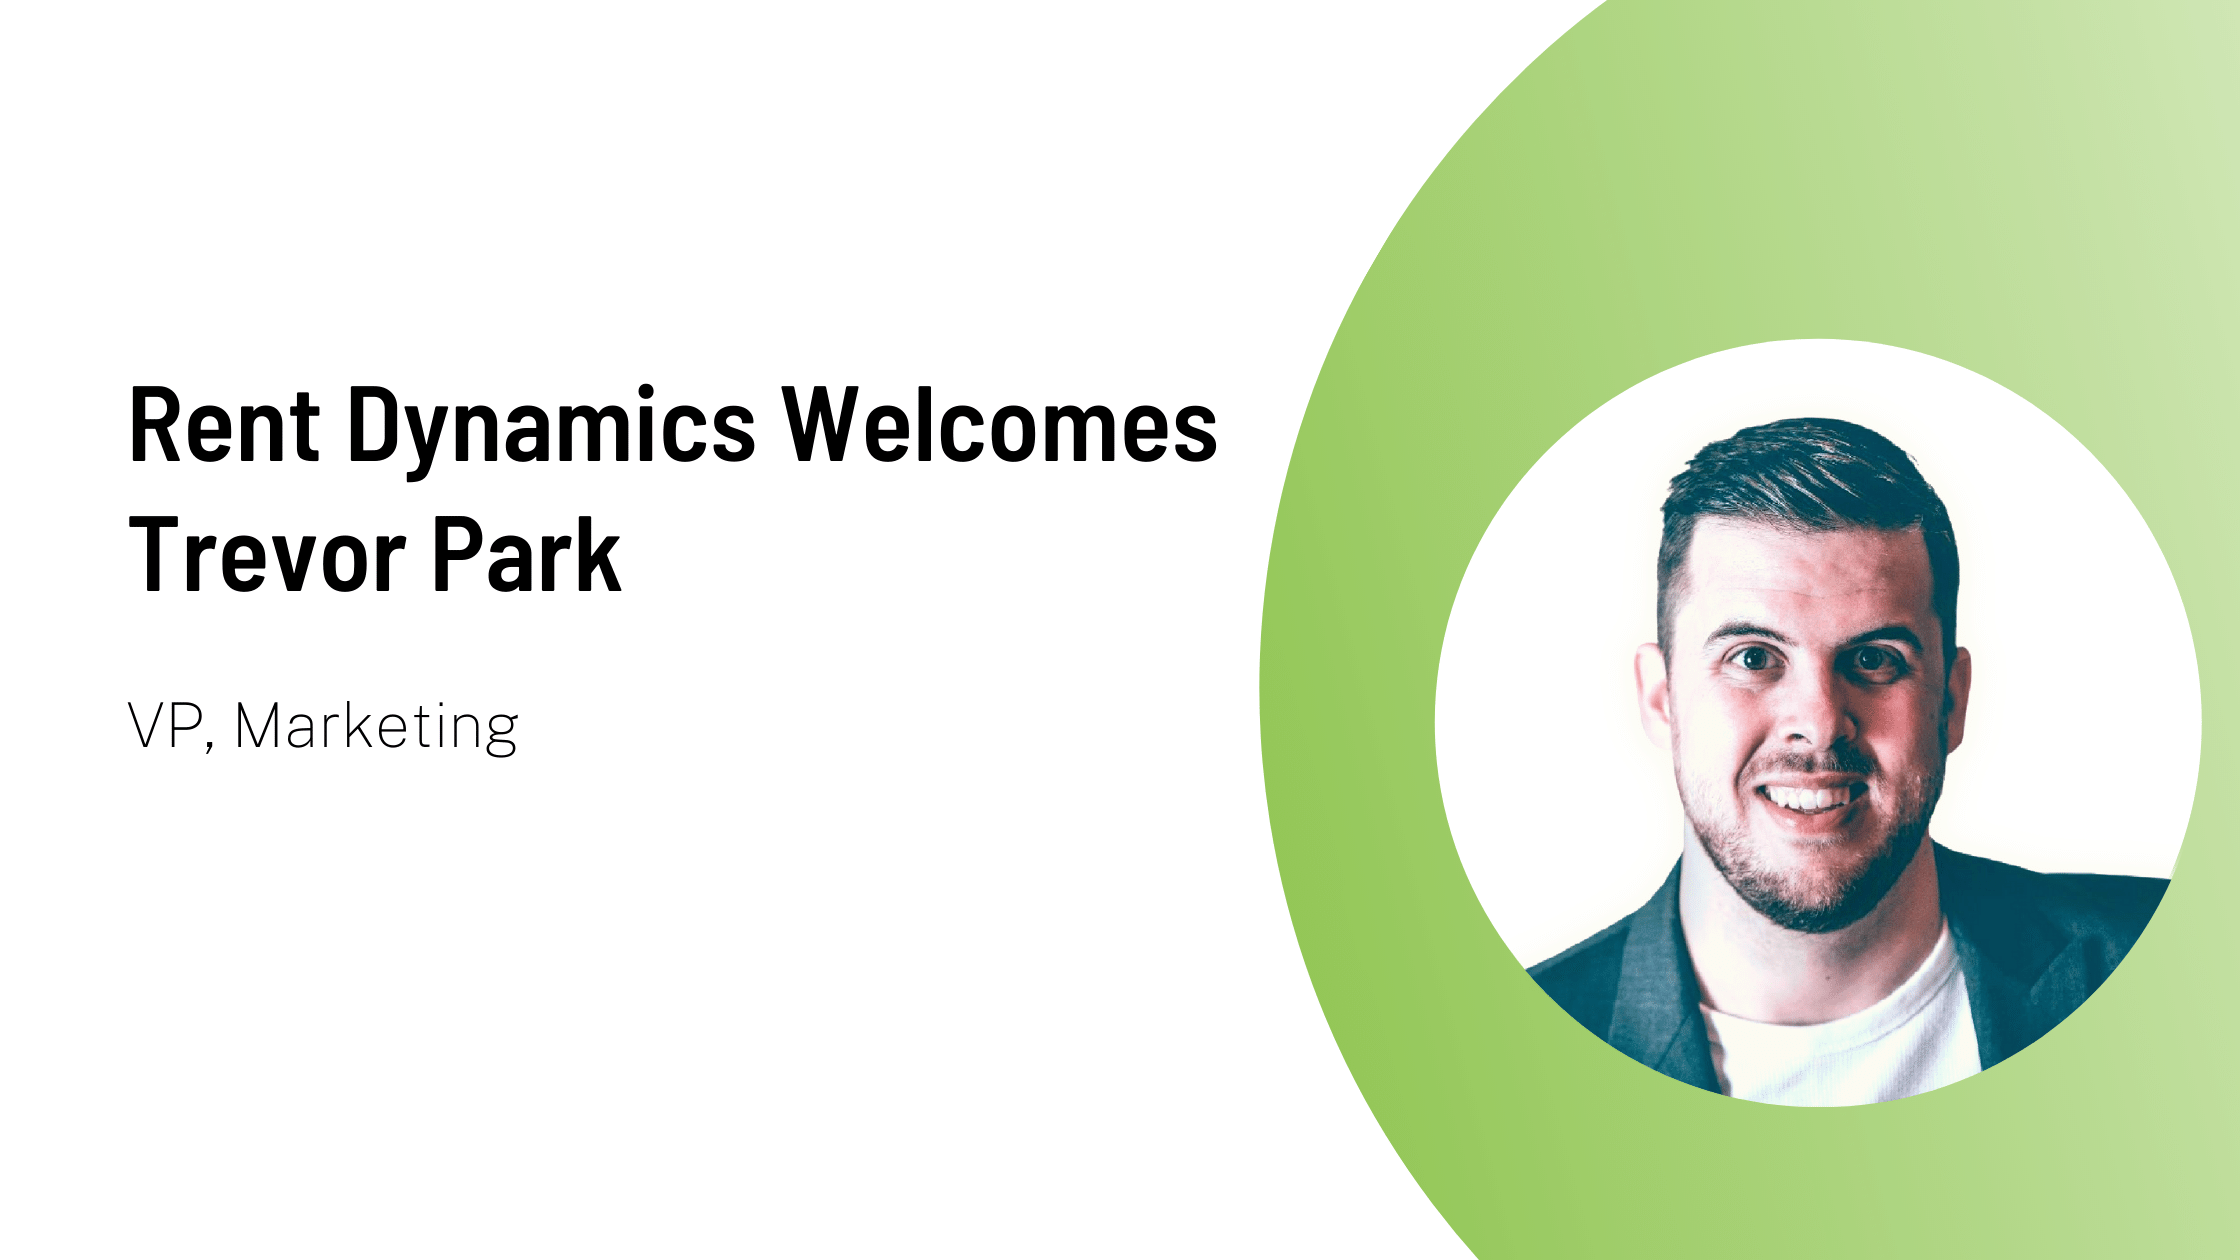 Rent Dynamics, a multifamily software as a service (SaaS) conglomerate, welcomes new VP of Marketing, Trevor Park, to its National Sales team.